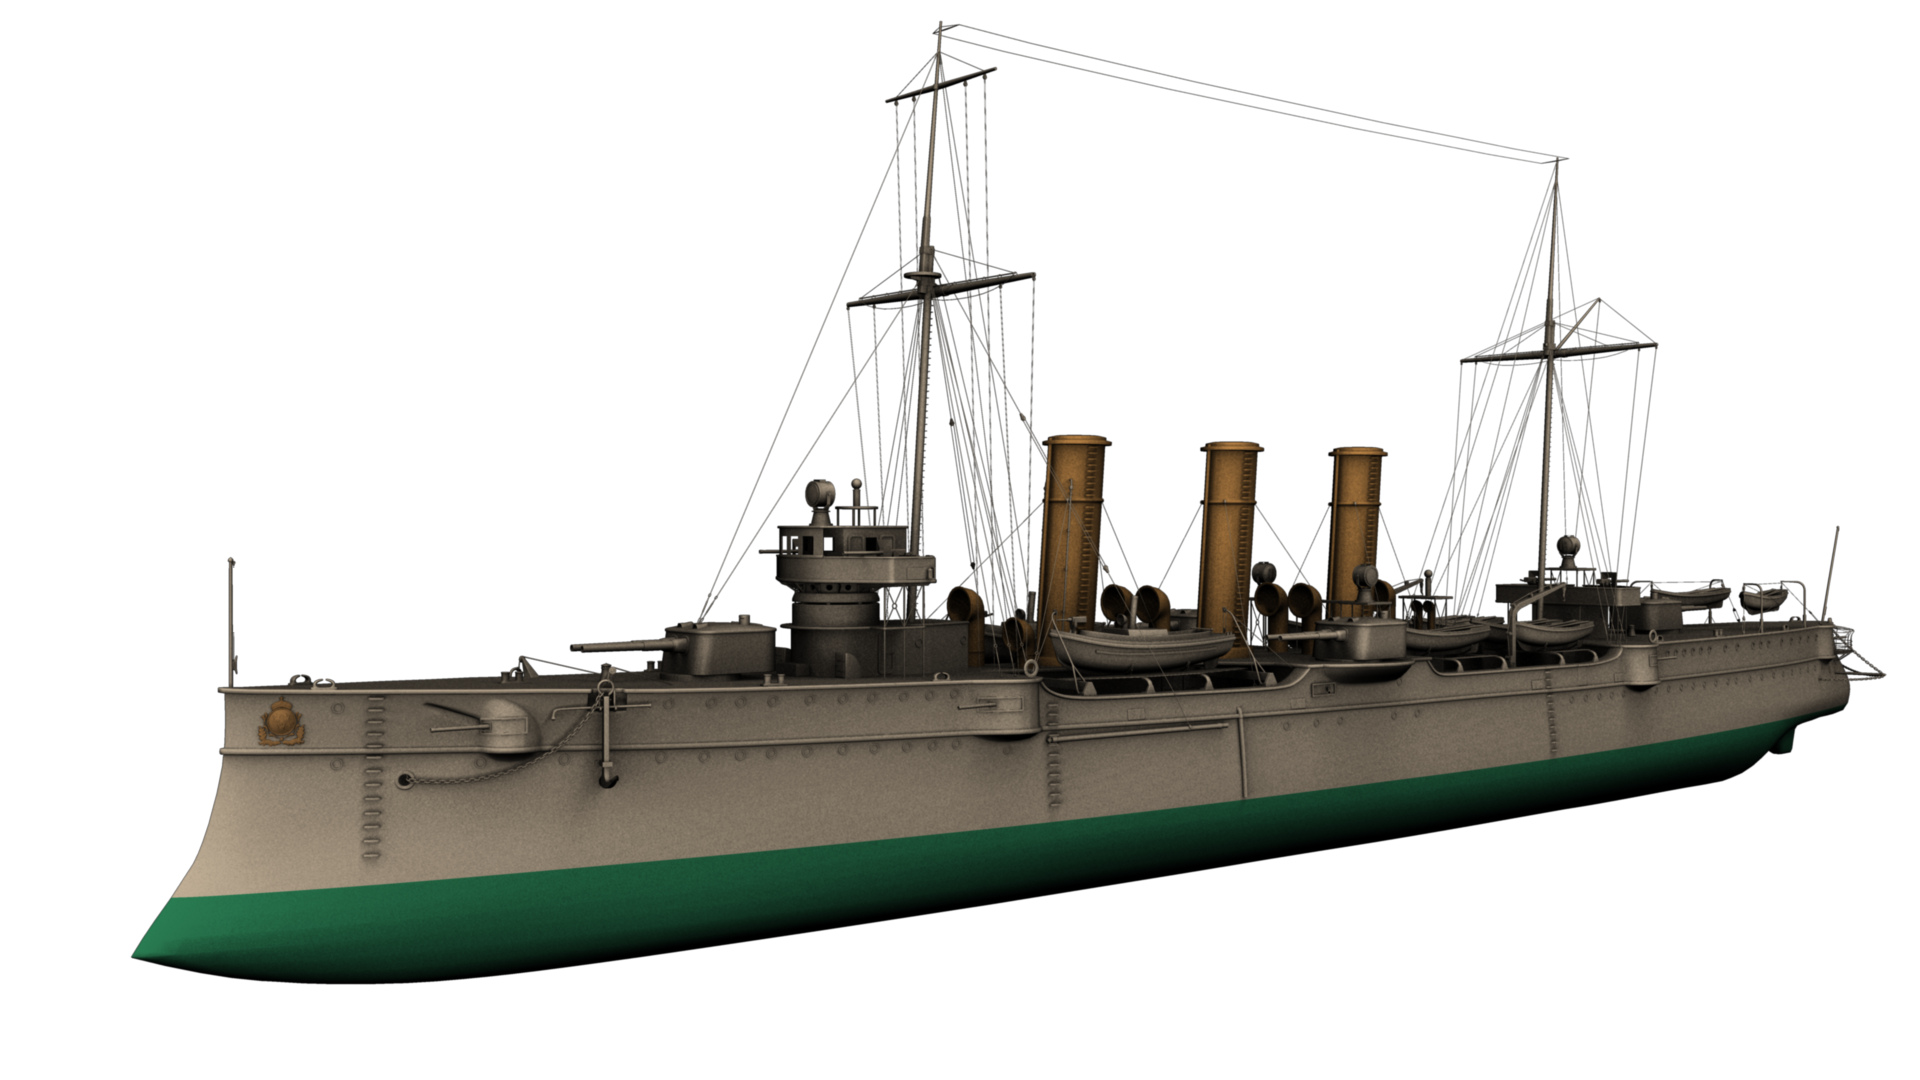 Iu0027M Nearly Done With Modelling The Ship. I Hope To Be Done With The Railing And Ladders Today, As Well As Some Other Minor Details. - Ship, Transparent background PNG HD thumbnail